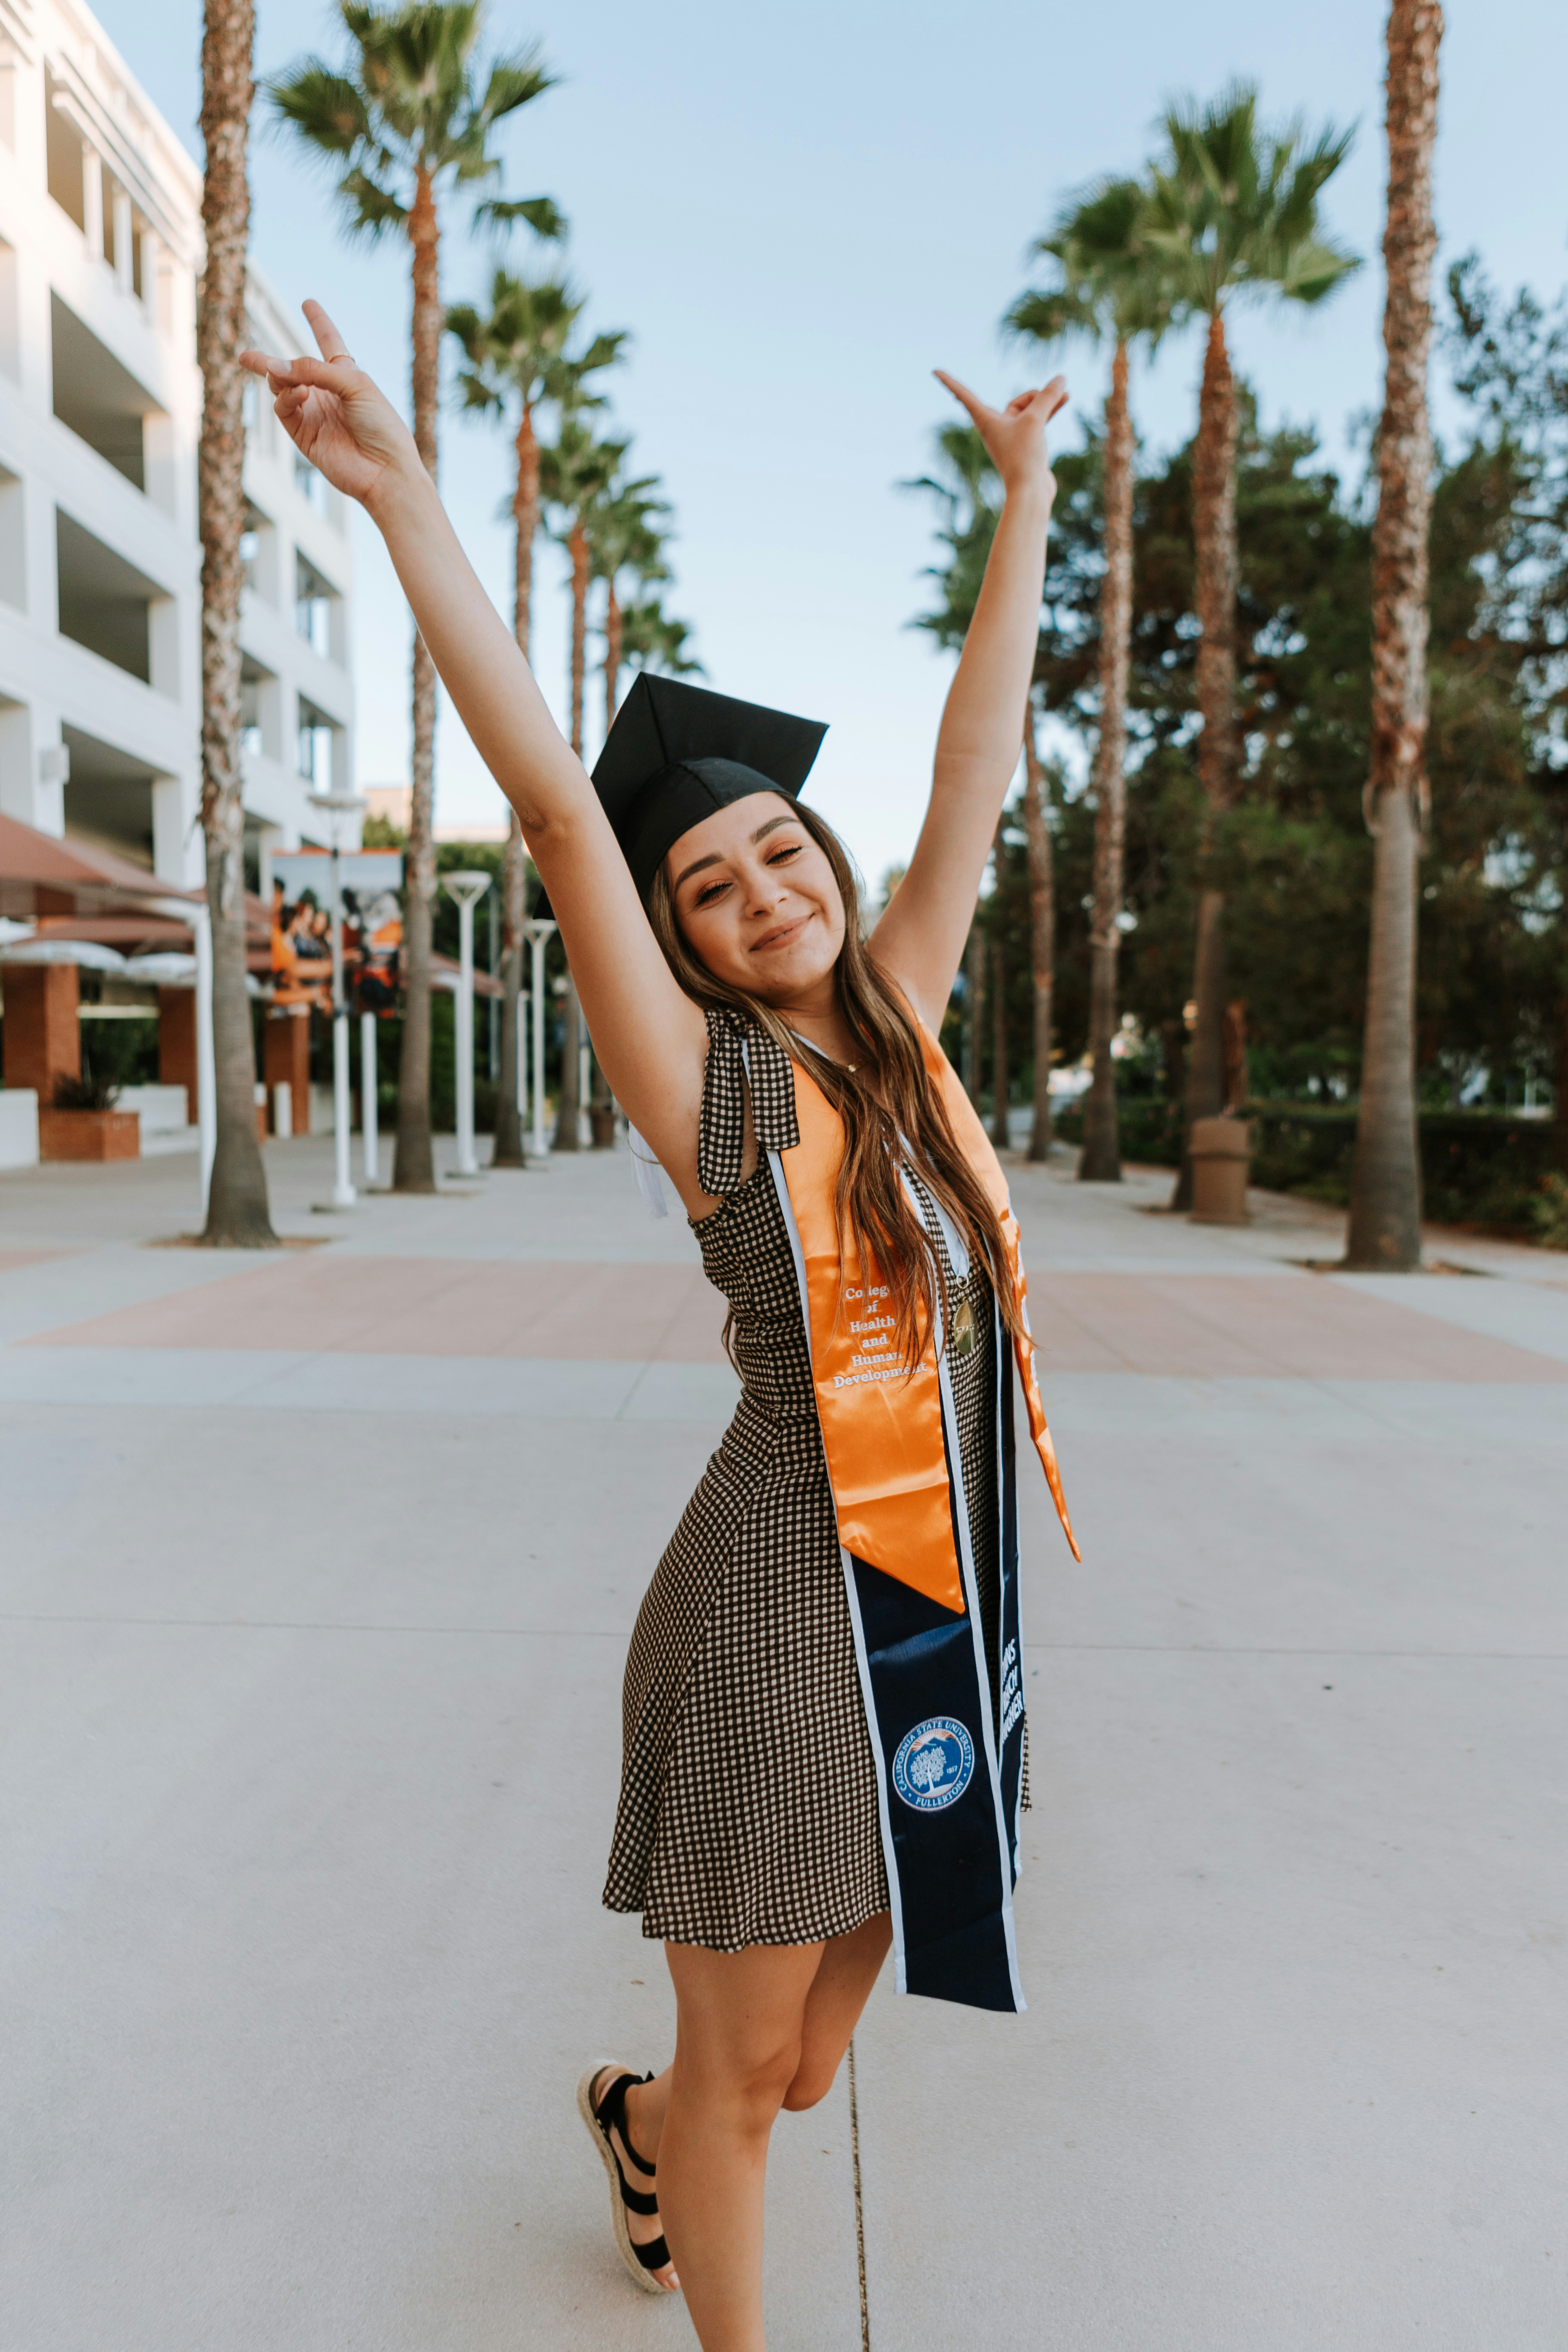 500+ College Girl Pictures HQ Download Free Images on Unsplash